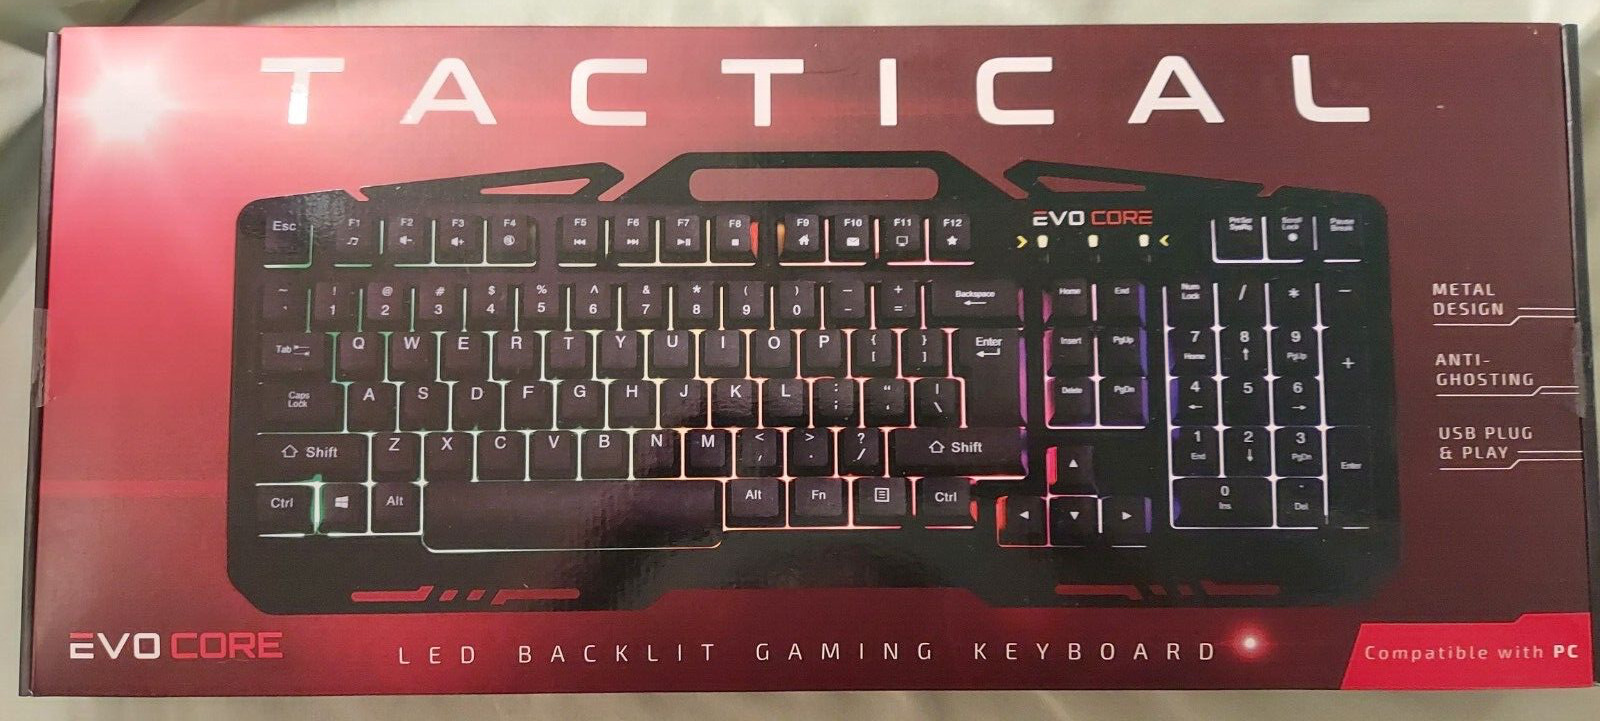 Tactical LED Backlit Gaming Keyboard by Evo Core new in box for PC